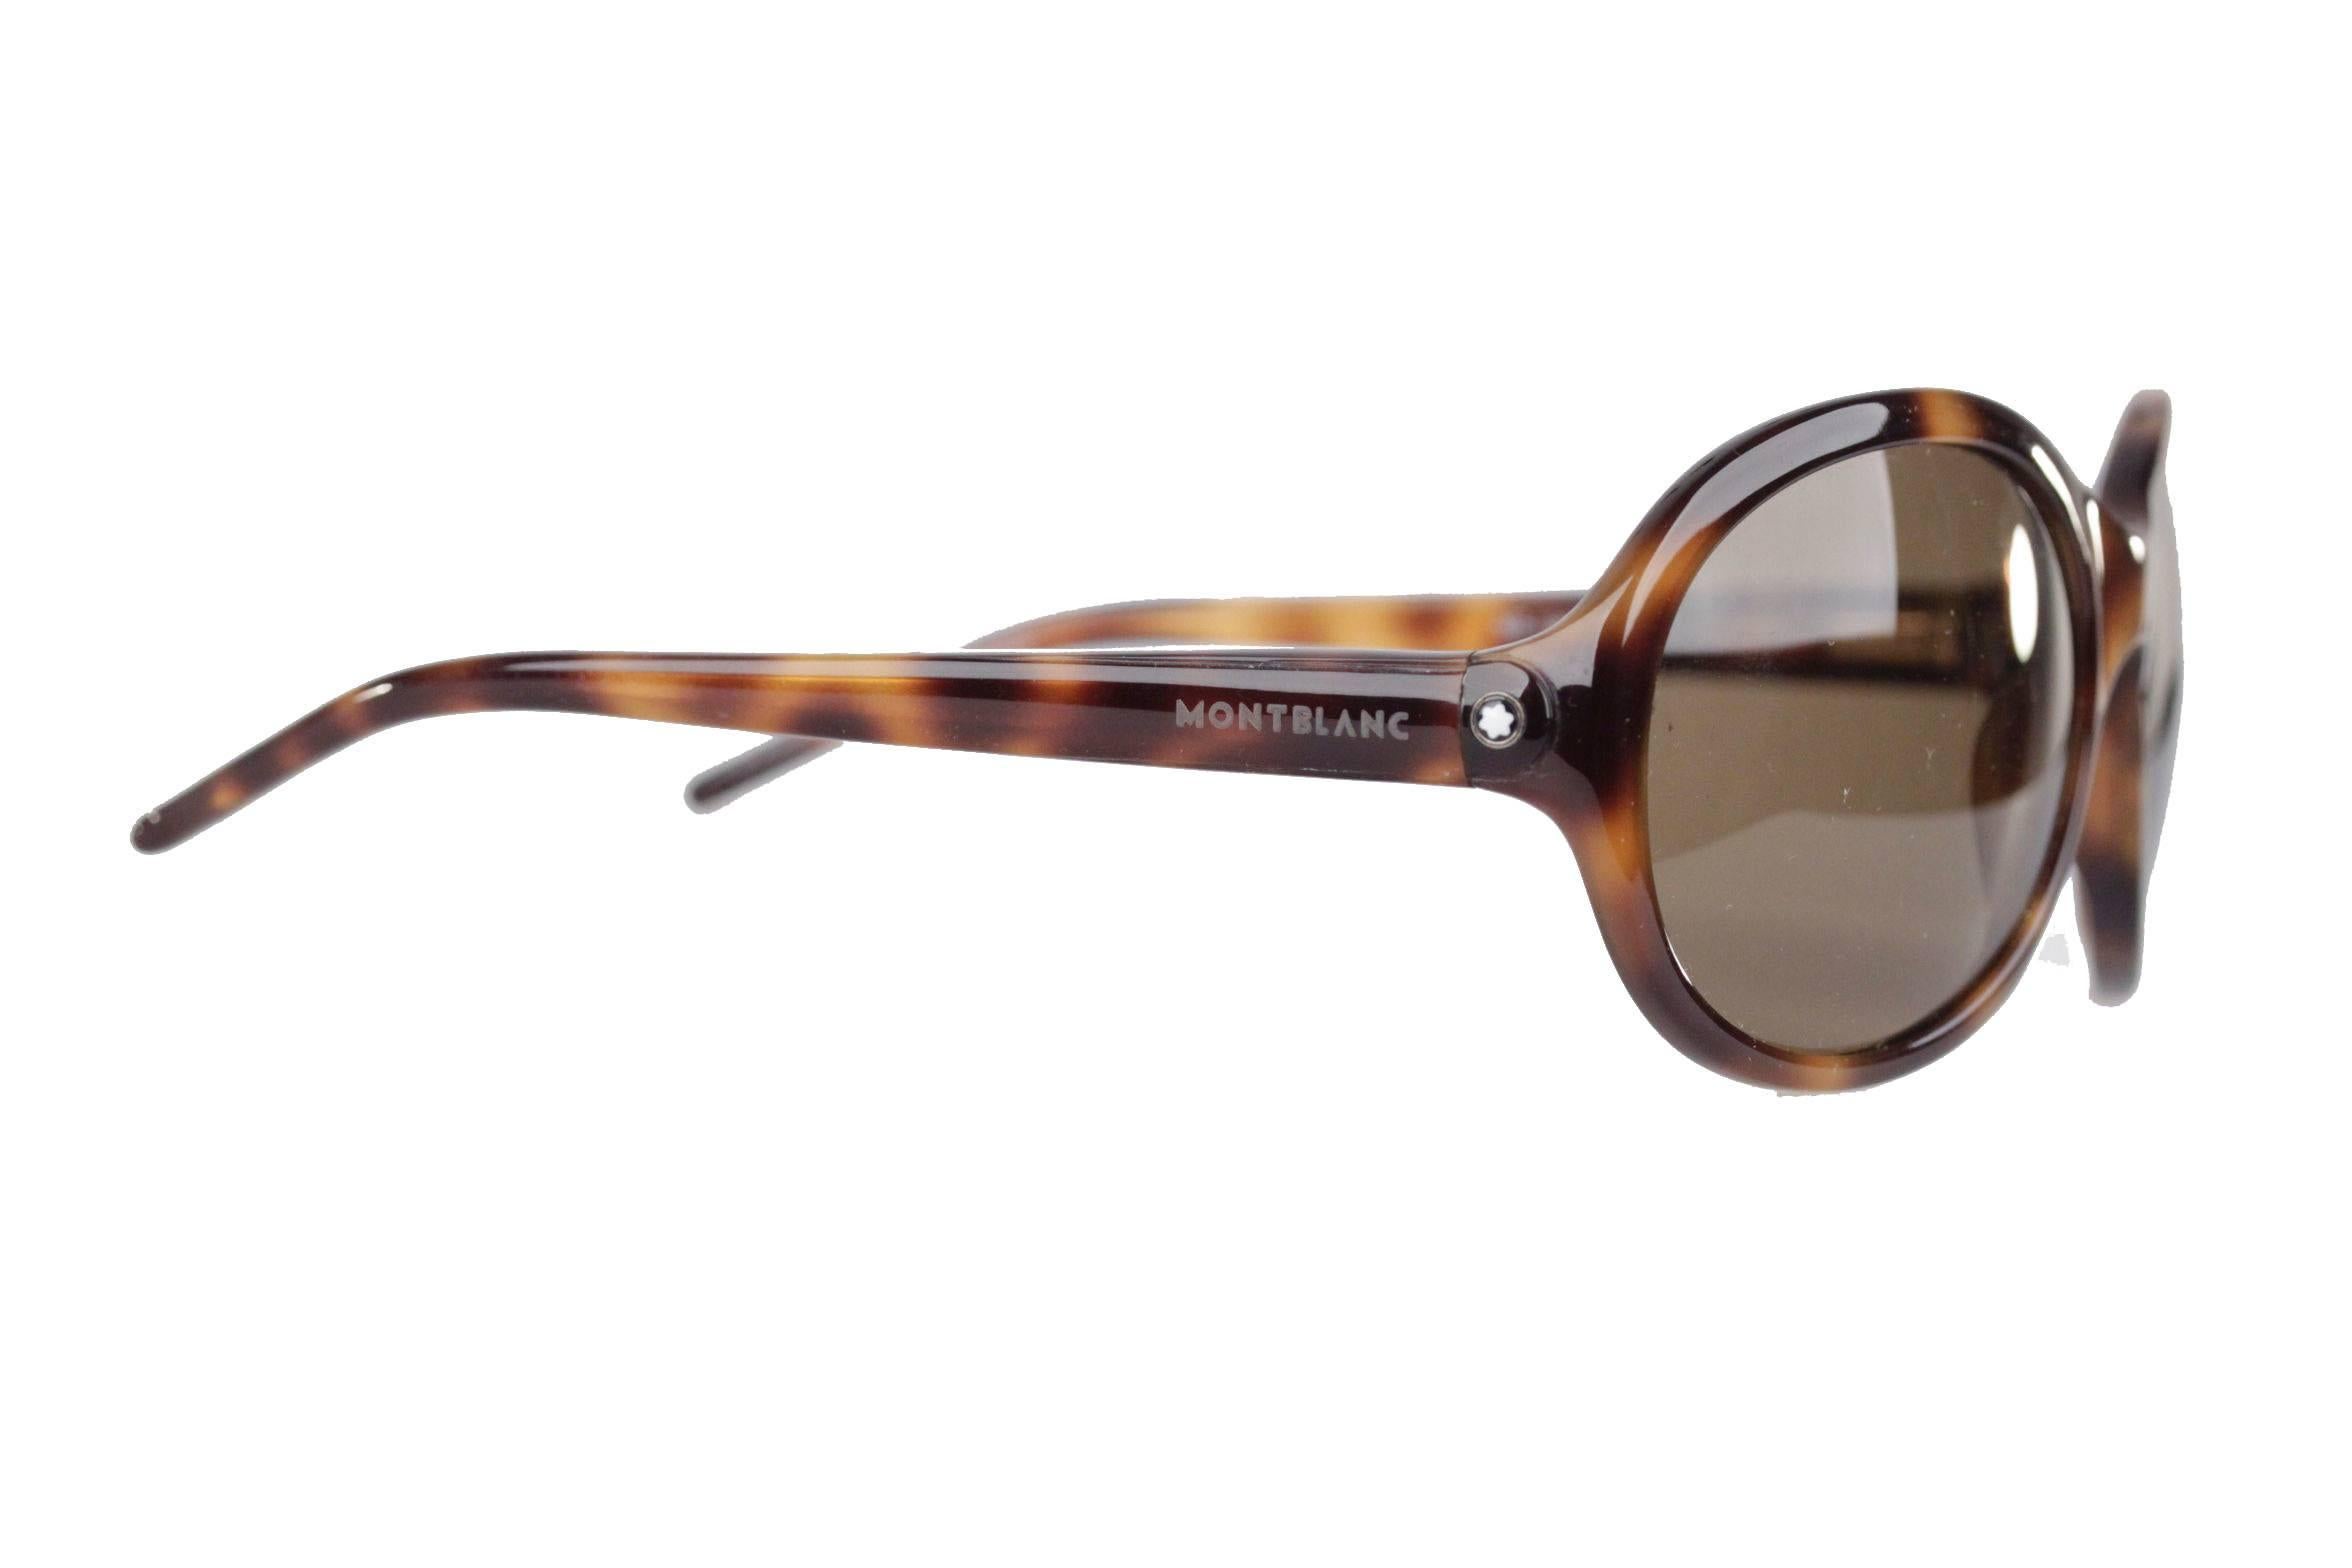 - Women sunglasses, signed MONTBLANC ,Made in Italy

- Brown lens (original lens w/ MONTBLANC logo)

- 100% UV protection

- Brown tortoise acetate frame

- MONTBLANC signatures on temples

Style name & model refs: MB 139S - T32 - 59/18 -